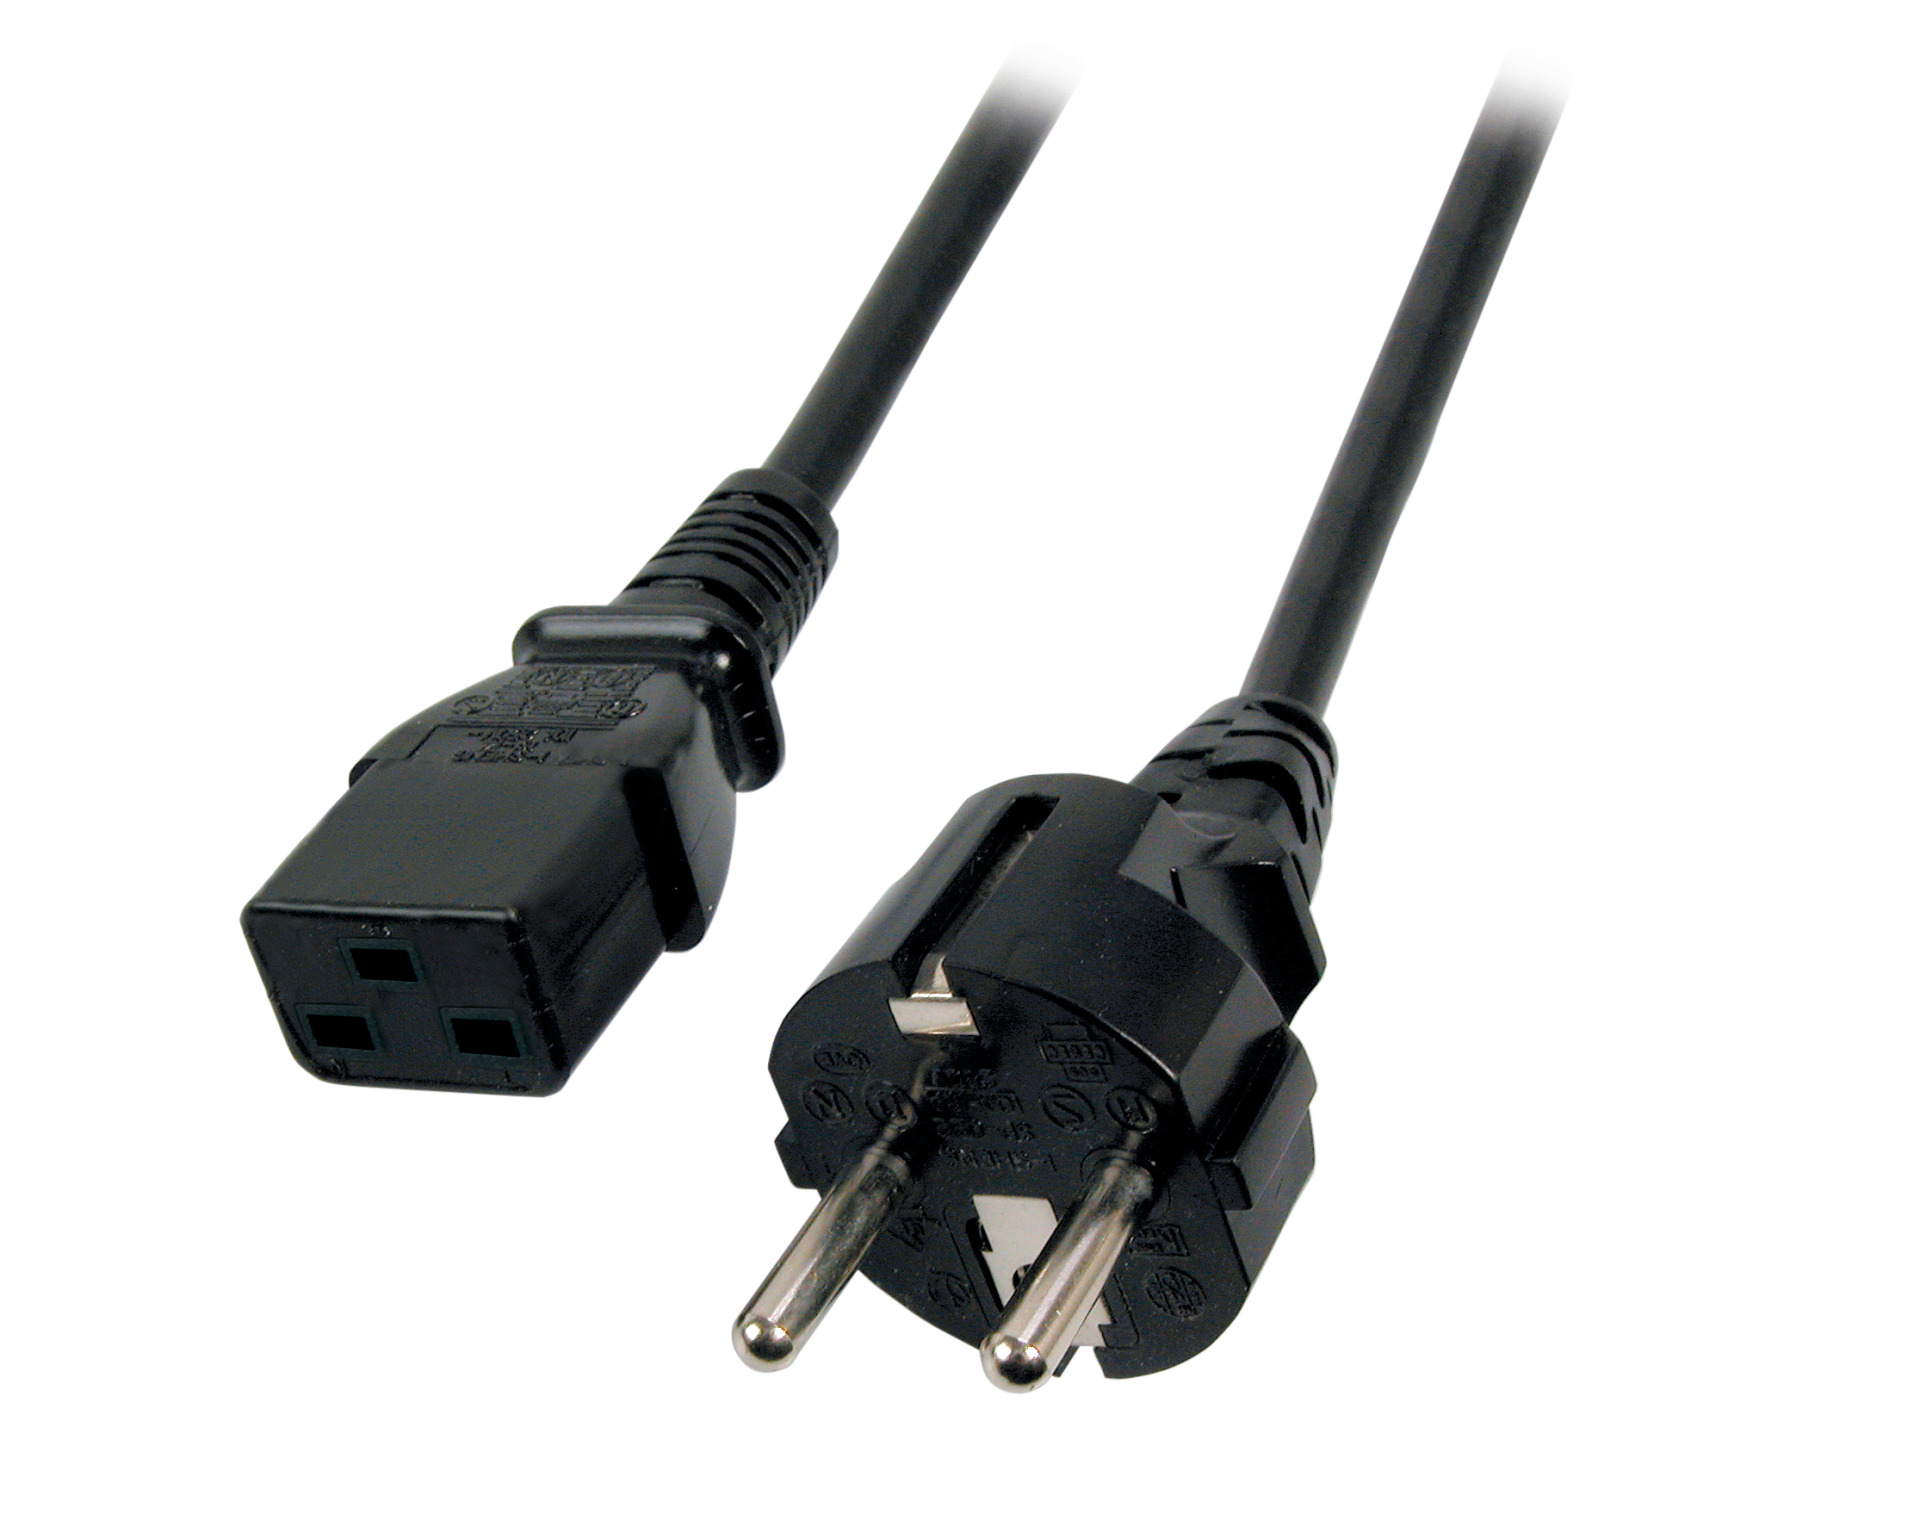 Power Cable CEE7/7 180° - C19 180°, Black, 1.8 m, 3 x 1.50 mm²